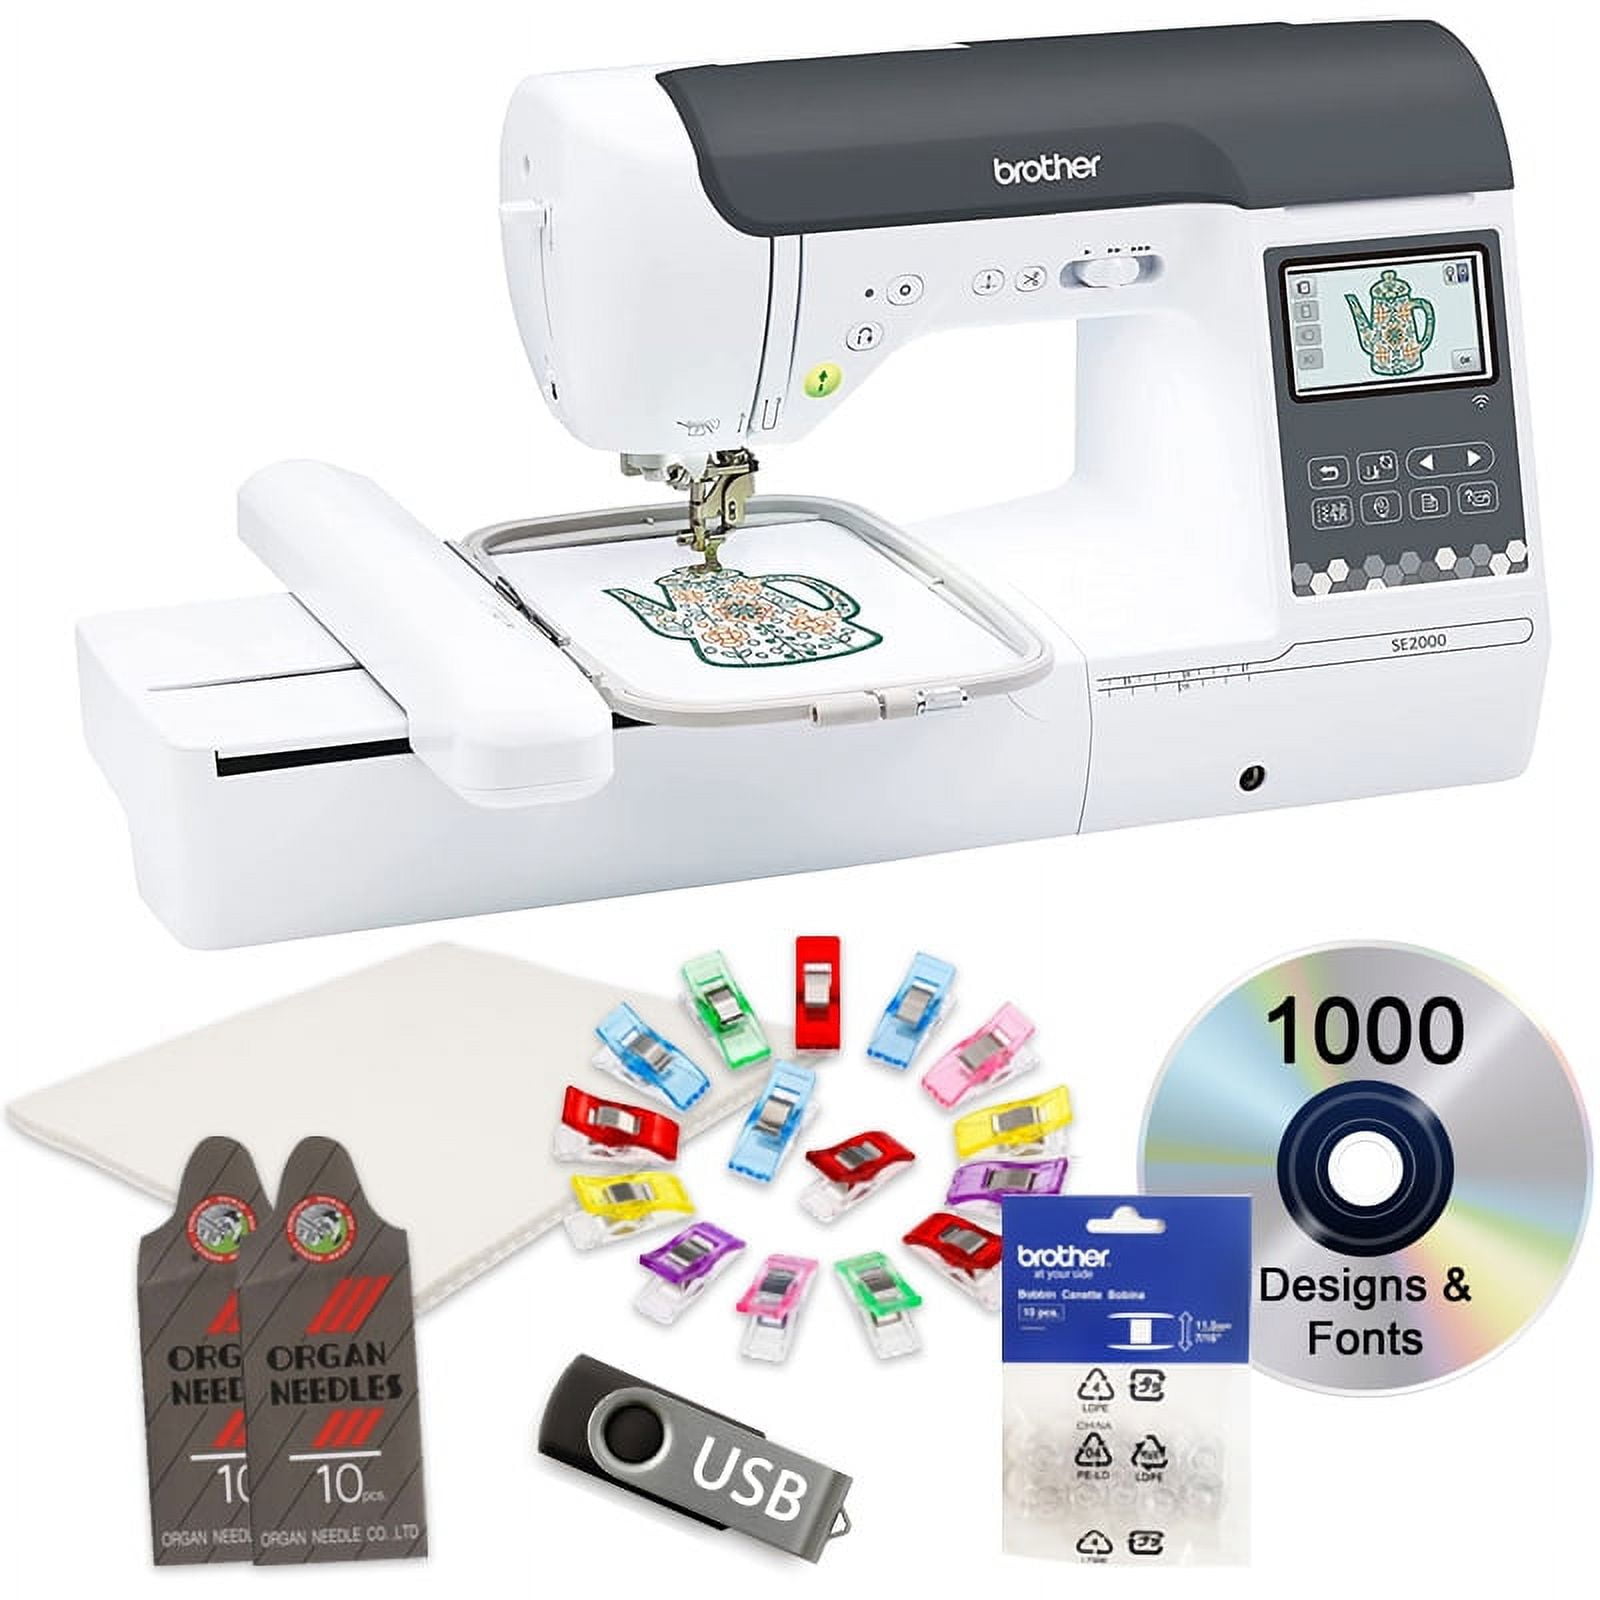 Brother SE700 Embroidery & Sewing Machine w/ Embroidery Kit Bundle